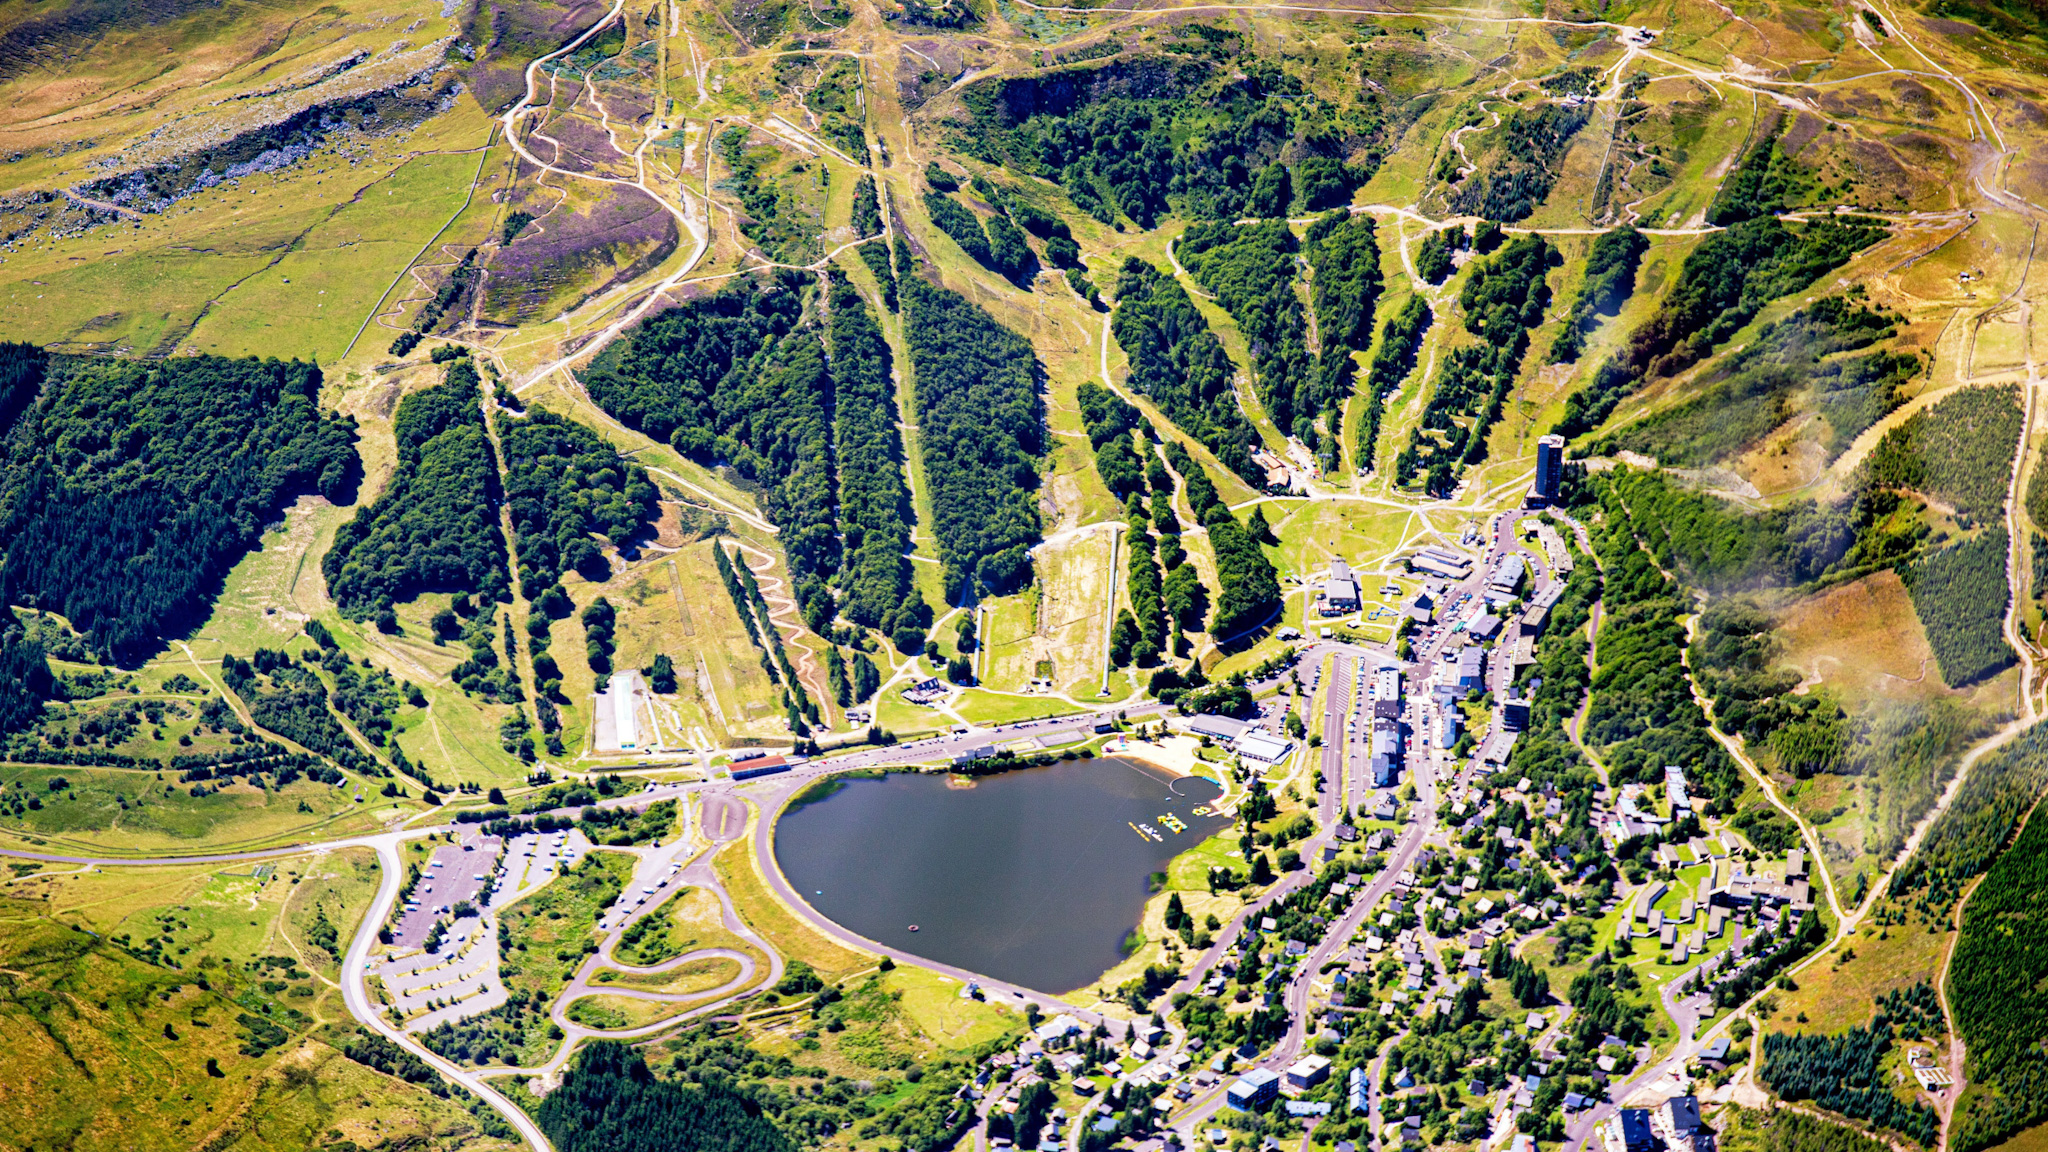 Aerial view of the resort of Super Besse, Lac des Hermines and the center of the resort